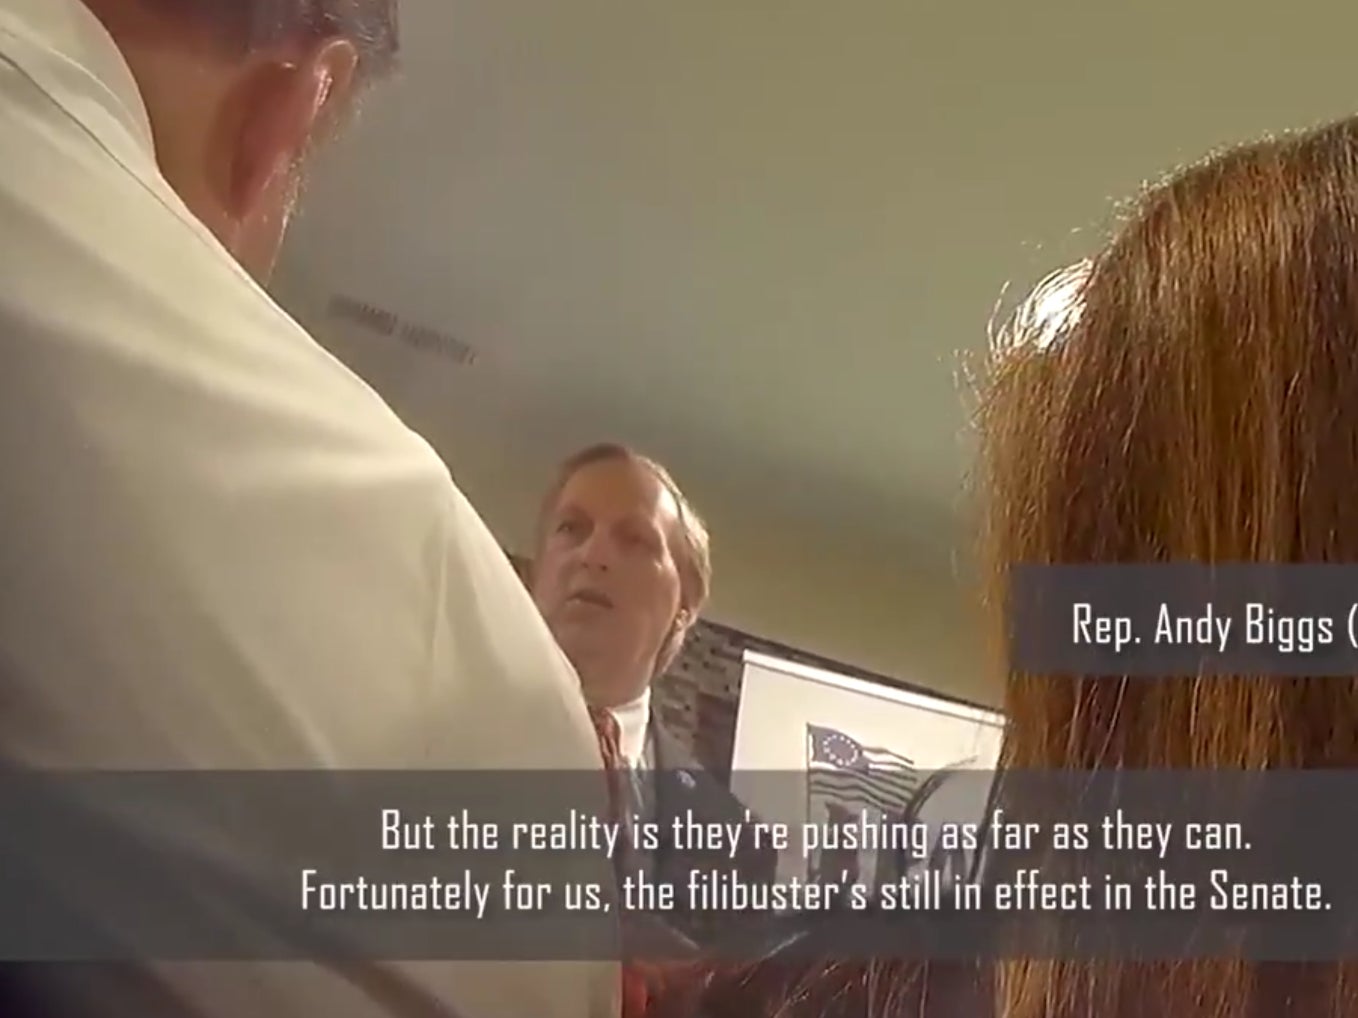 Video footage shows GOP lawmakers thanking Democrats on filibuster